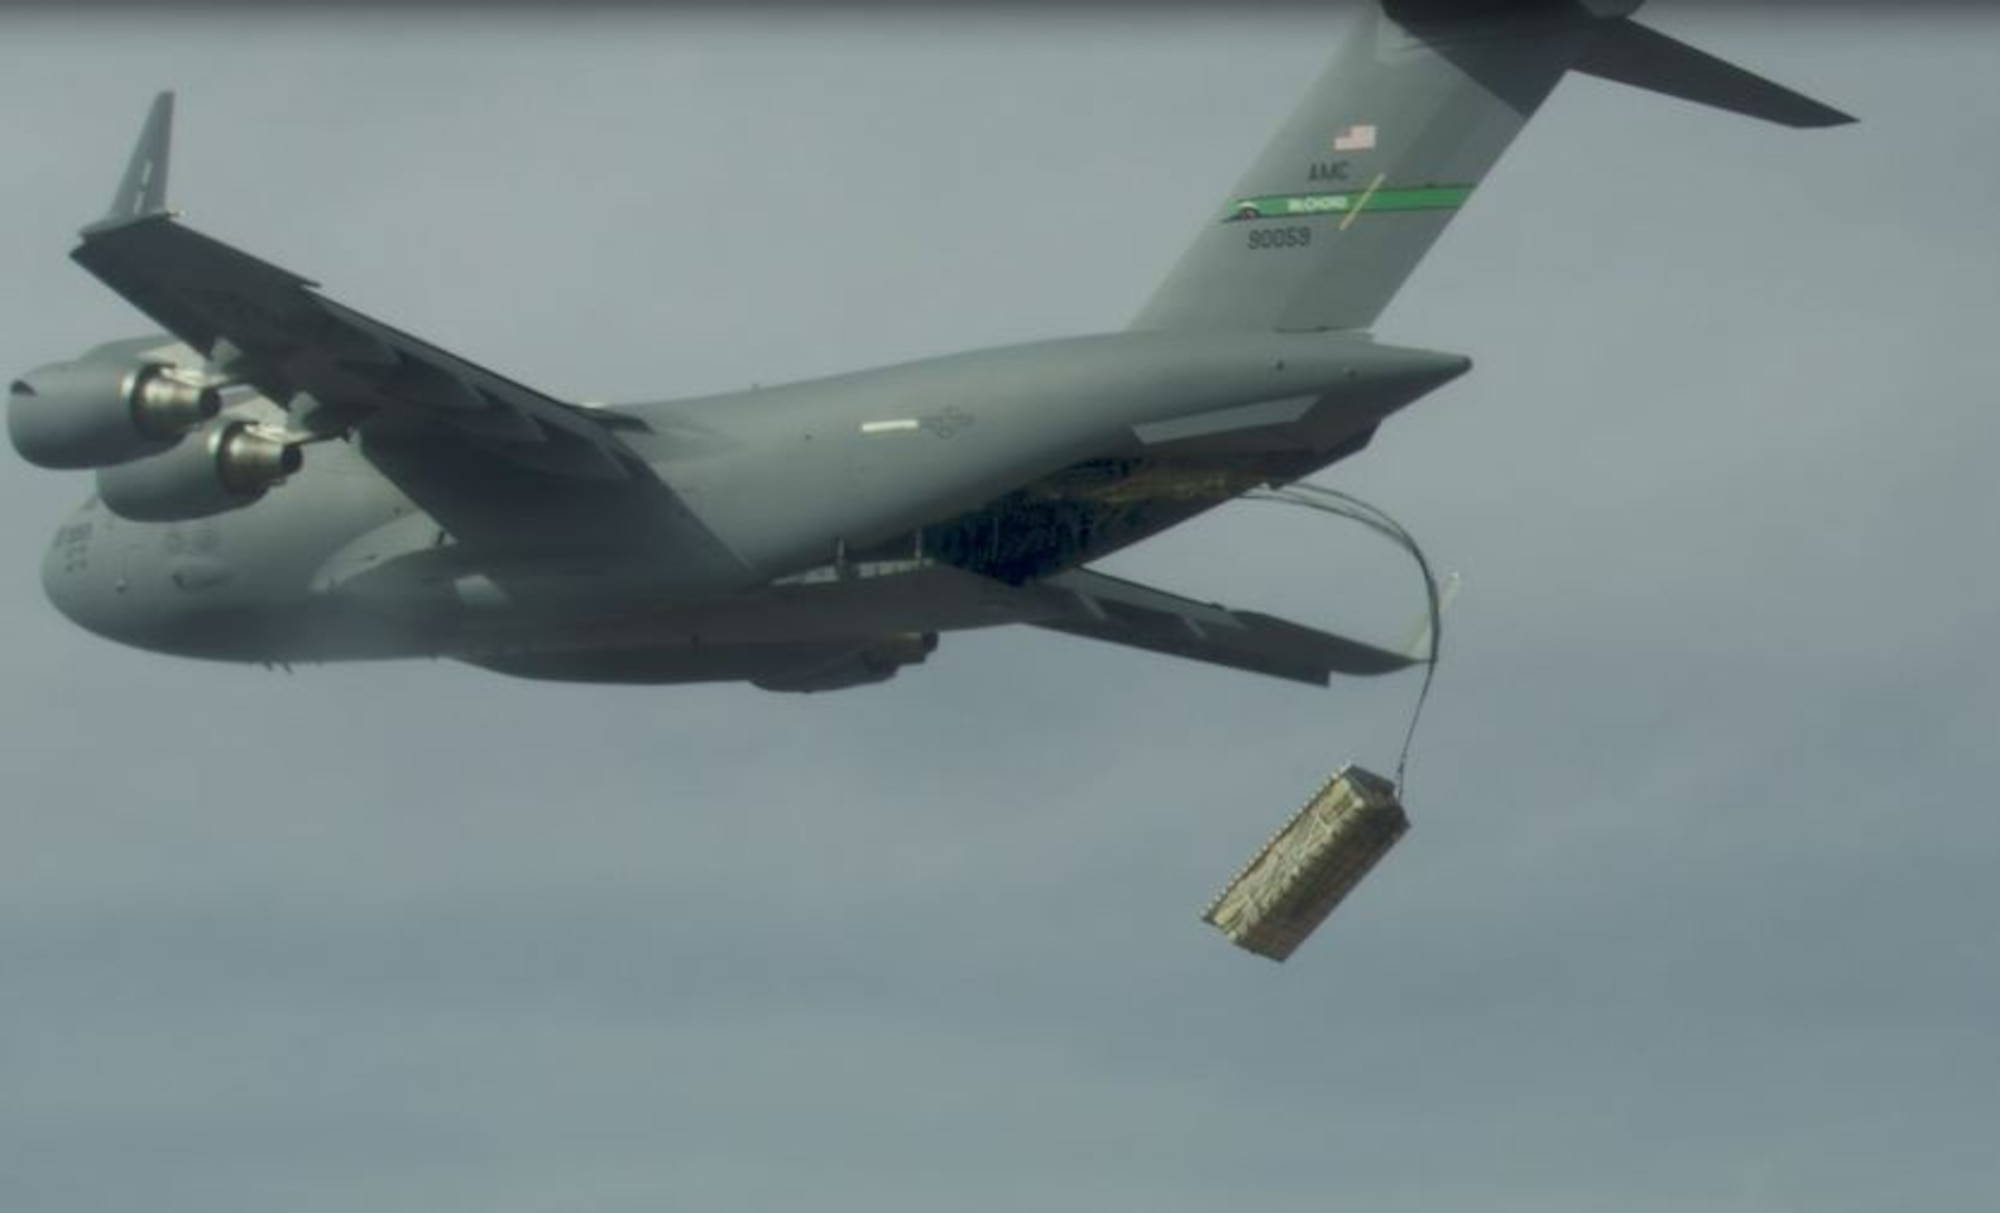 A high altitude airdrop of palletized munitions (JASSM simulants) from a C-17 using standard operational airdrop procedures was conducted during the Air Force’s Advanced Battle Management Family of Systems (ABMS) Onramp #2 activities. (Courtesy photo)